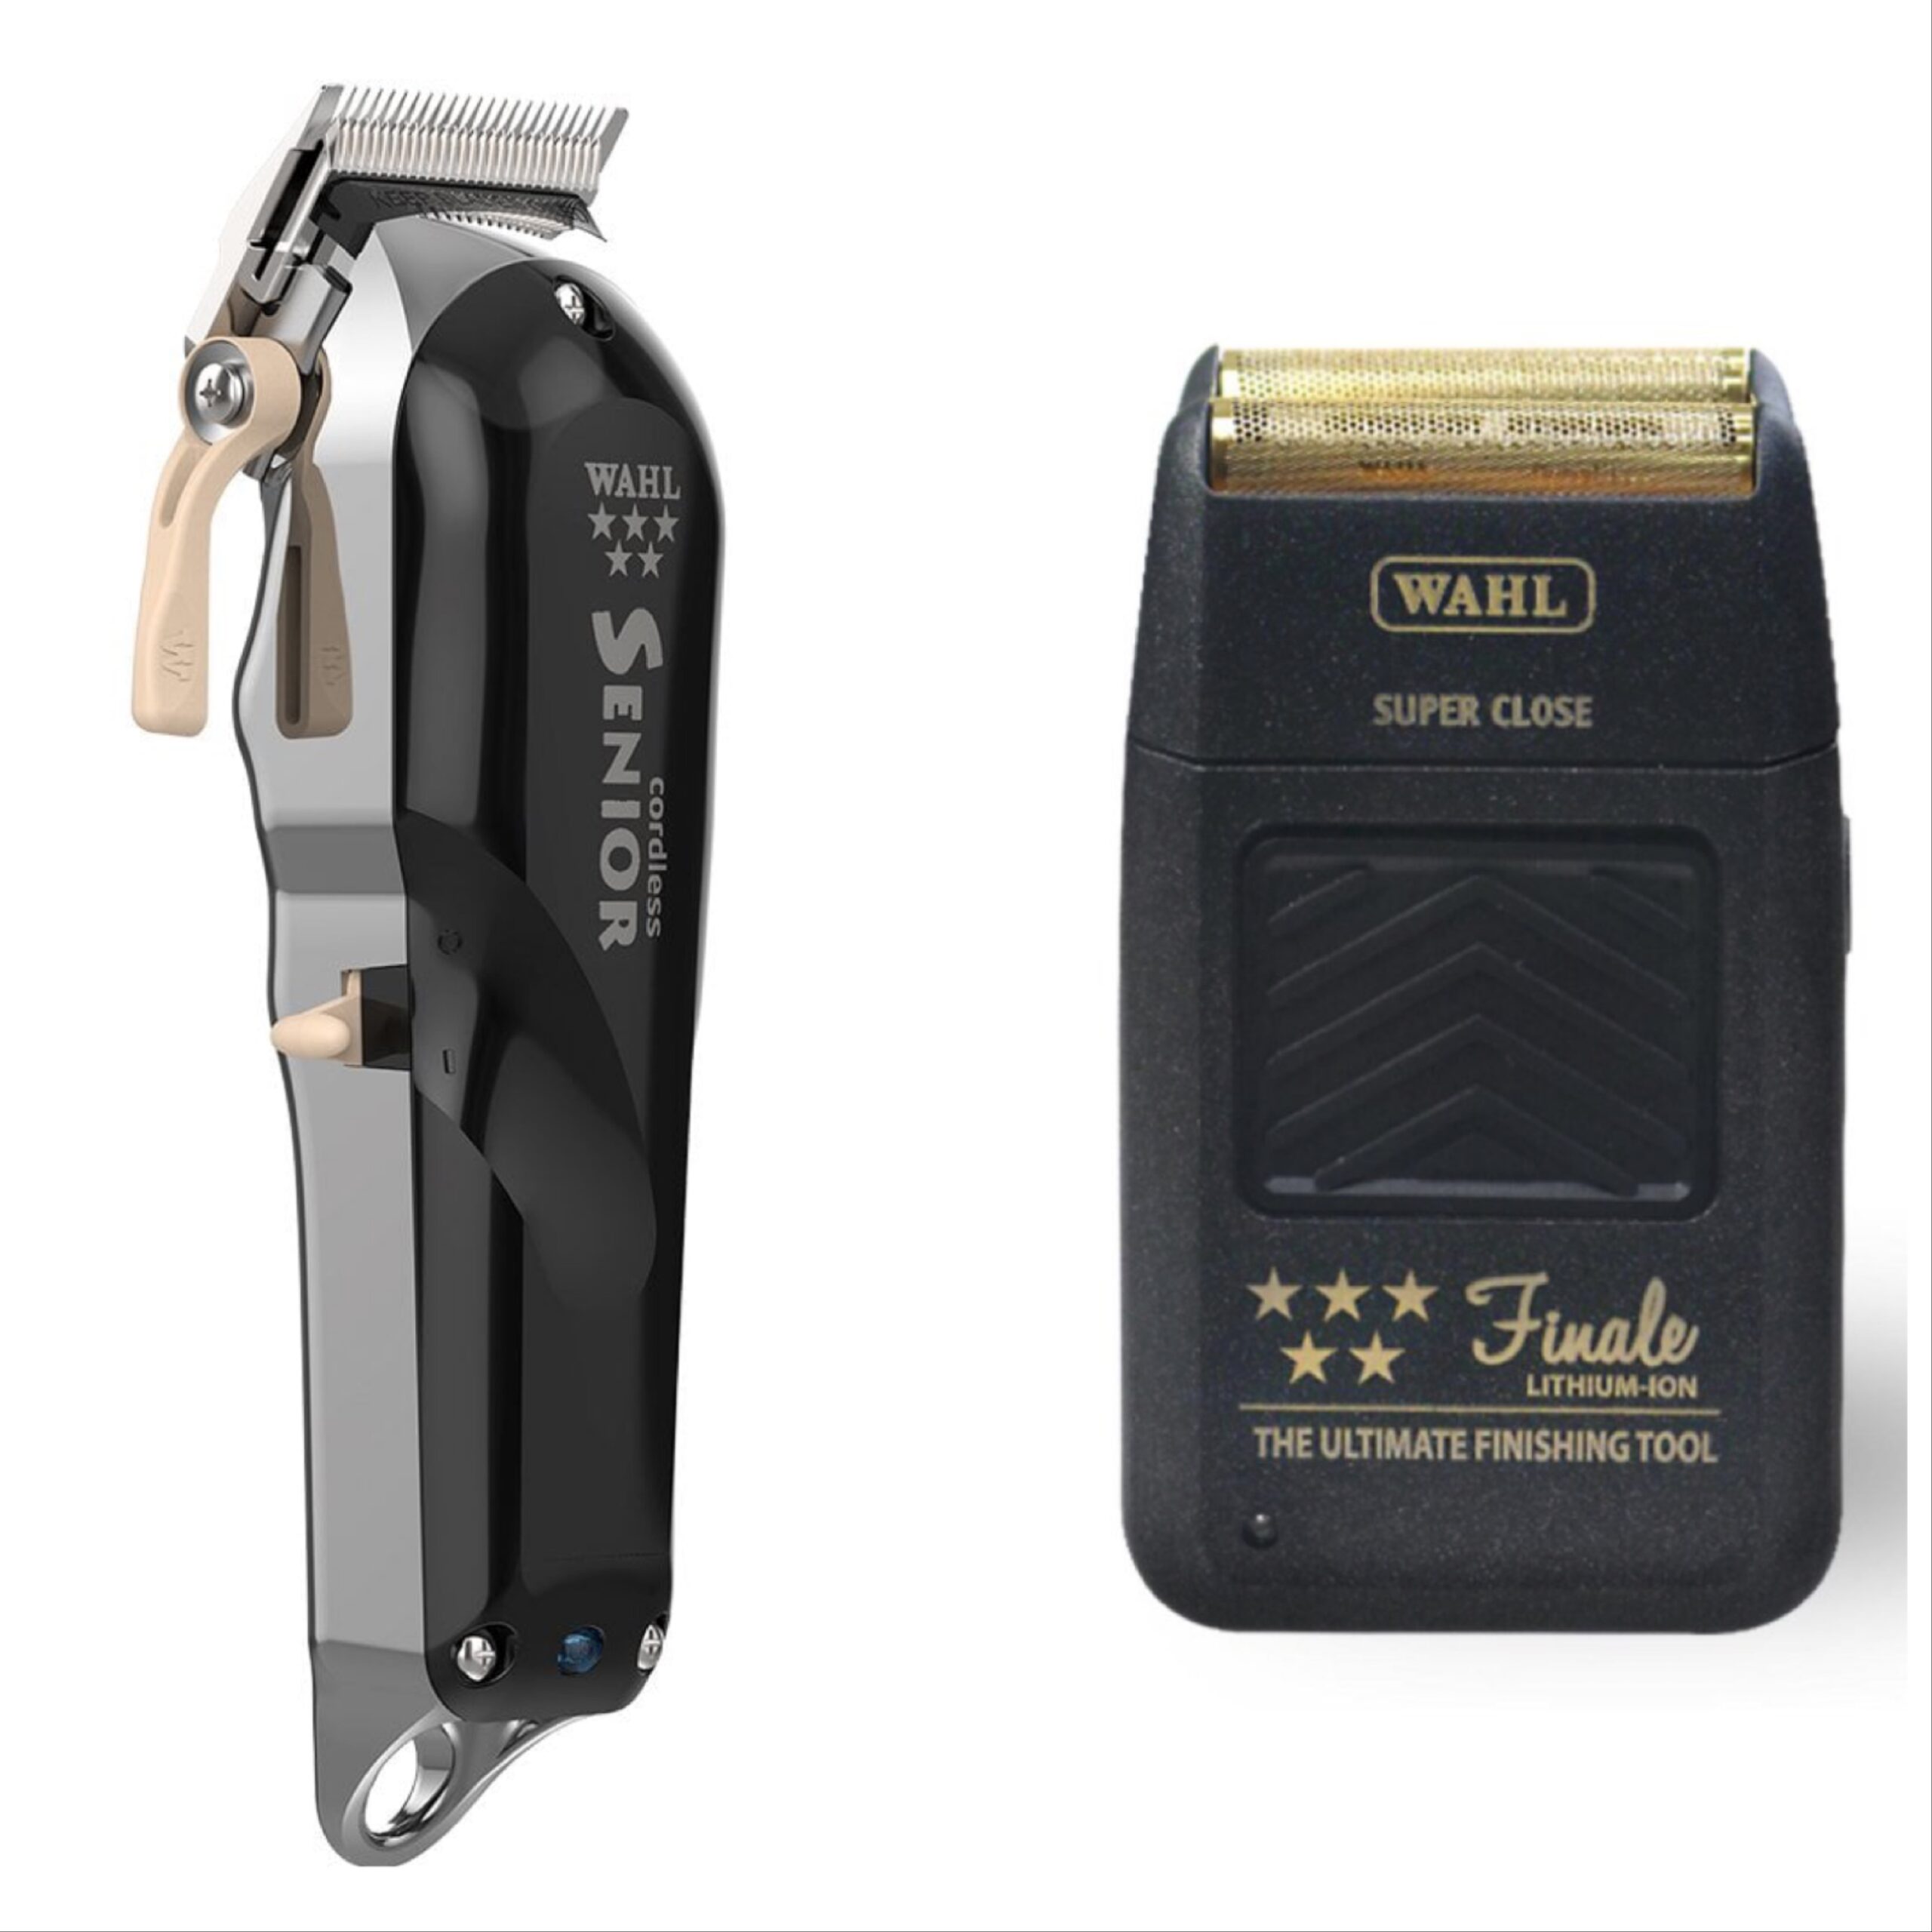 Wahl Pro 2pc Combo by ibs - 5 Star Senior Cordless